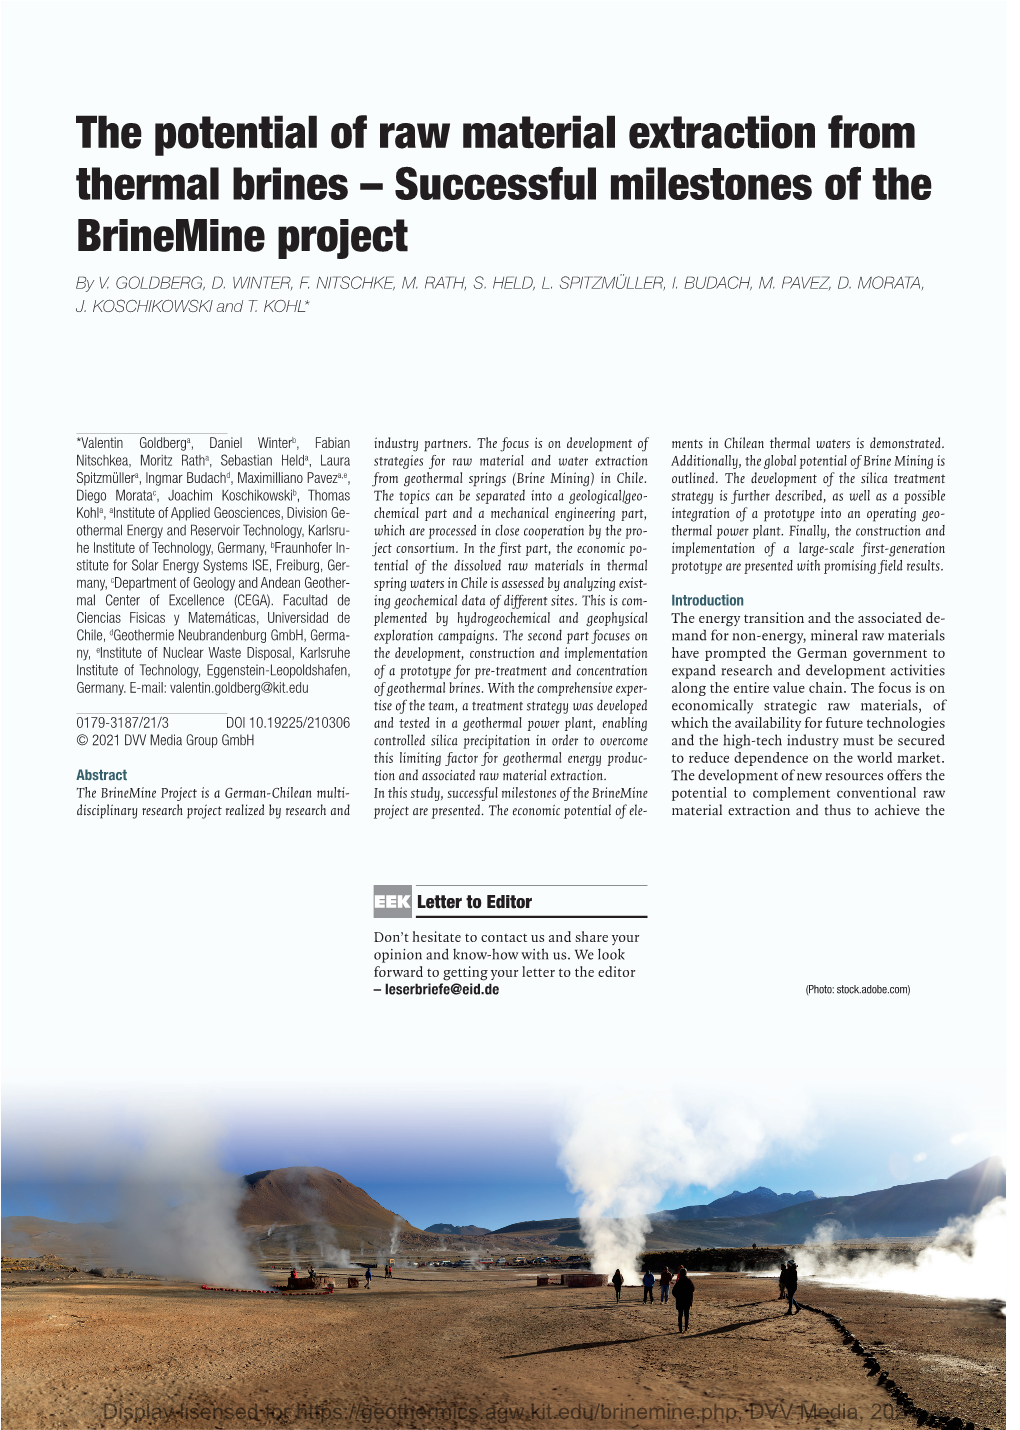 The Potential of Raw Material Extraction from Thermal Brines – Successful Milestones of the Brinemine Project